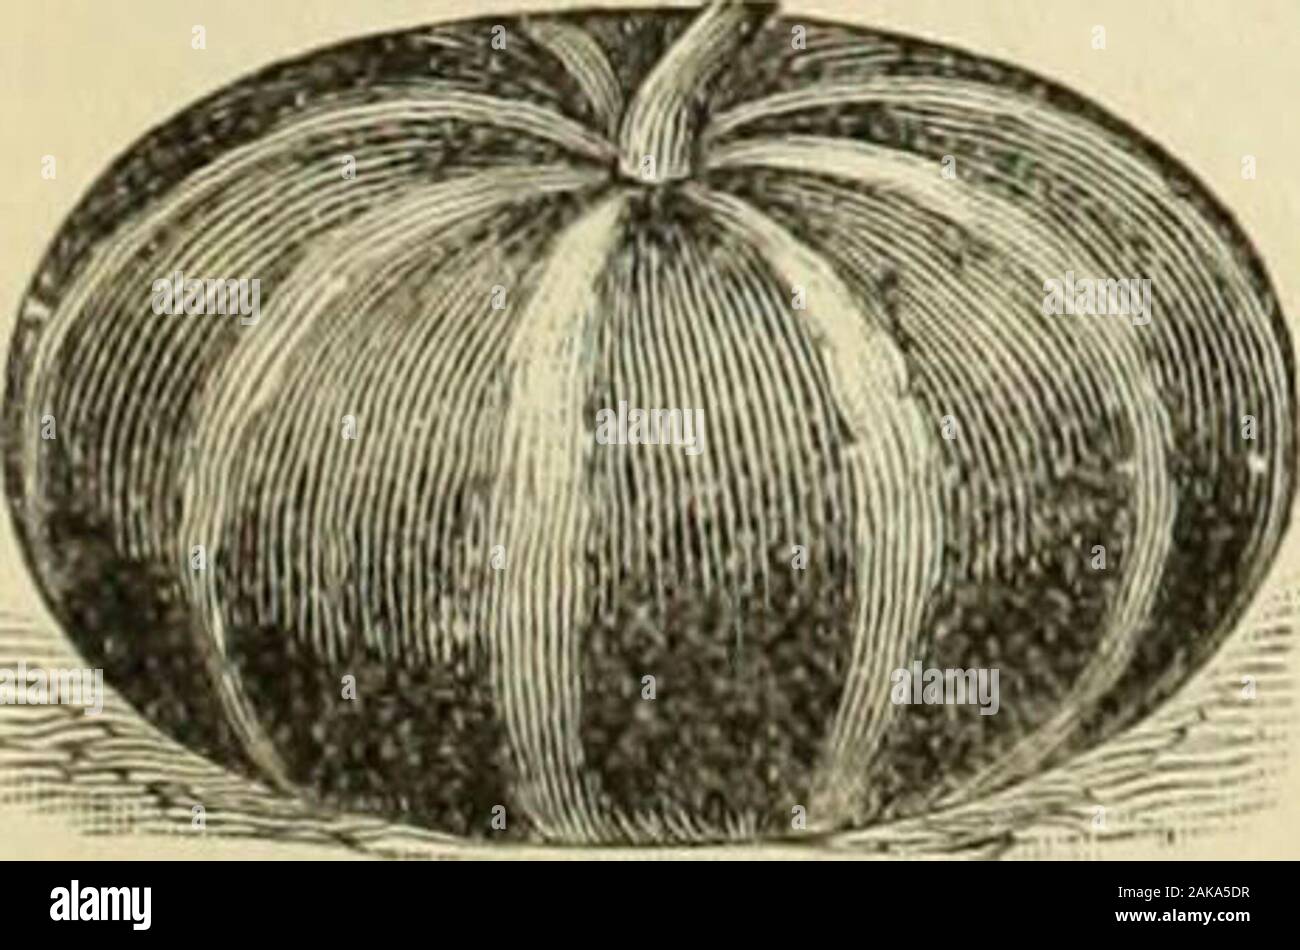 Maule's seed catalogue : 1896 . ESSEX HYBRID—It is not only one of the riche.st flavored finest 1grained, and sweetest of all the squash family, but one of the verv best keepersI know of. The flesh is thick, rich colored, and solid ; it is also one of the. most productive sqnaslies ever introduced. On a vine ^^K feet longsquashes, weighing collectively, :» pounds, have been counted, all aboutthesame size and well ripened. Pkt., 5 cts.; oz„ 10 cts. ; . lb., 25 cts. • lb. 76 els. NEW RED CHINA It is a good grower, matures early, and keeps in tine con-dition until late in the Spring. Its immensep Stock Photo